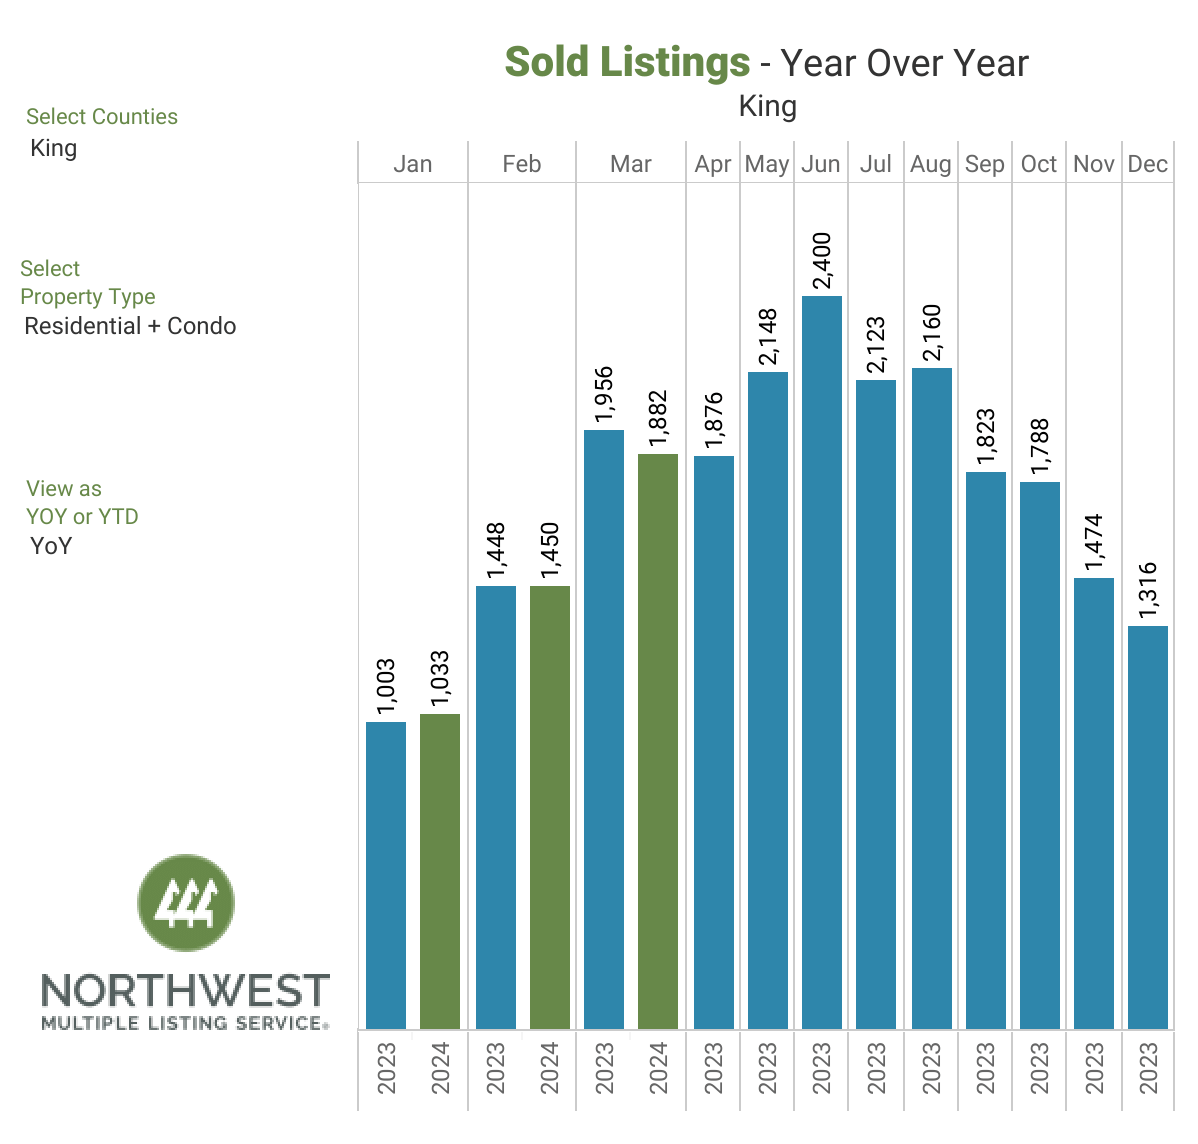 Information and statistics compiled and reported by the Northwest Multiple Listing Service.